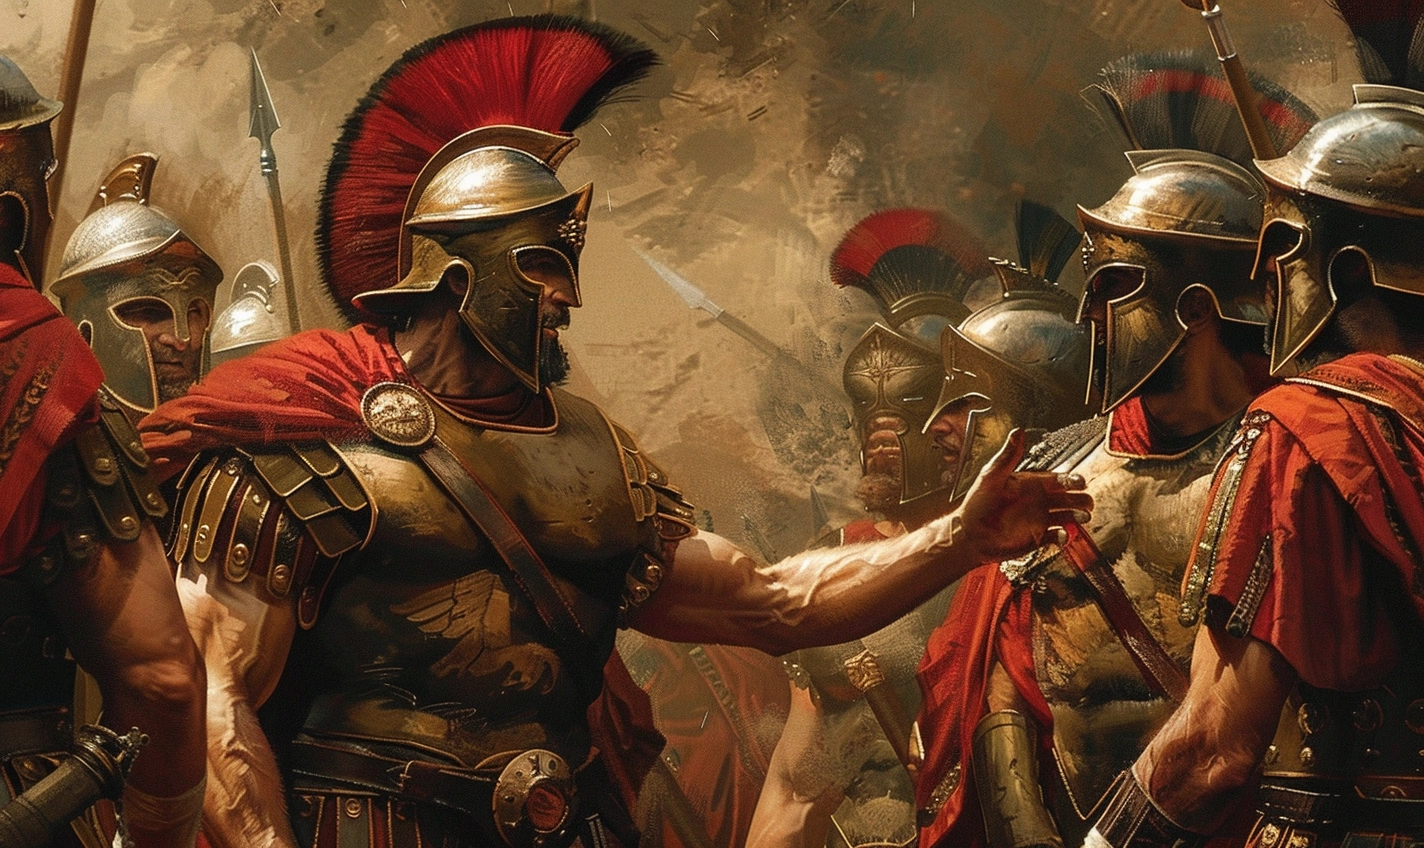 Strategos Vrasydas talks to his spartans soldiers